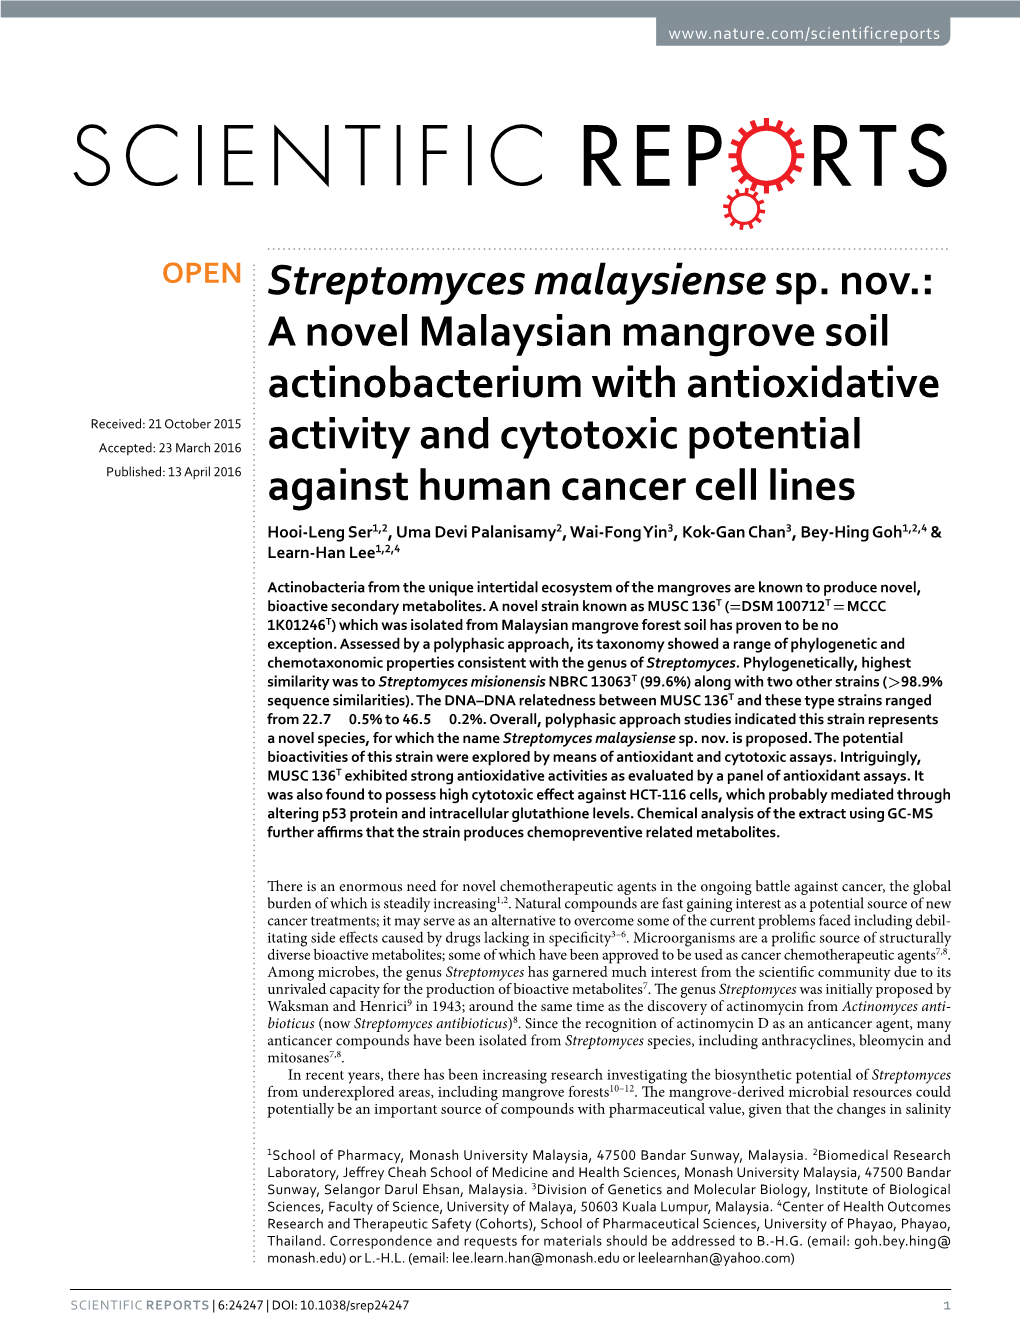 A Novel Malaysian Mangrove Soil Actinobacterium with Antioxidative Activity and Cytotoxic Potential Against Human Cancer Cell Lines